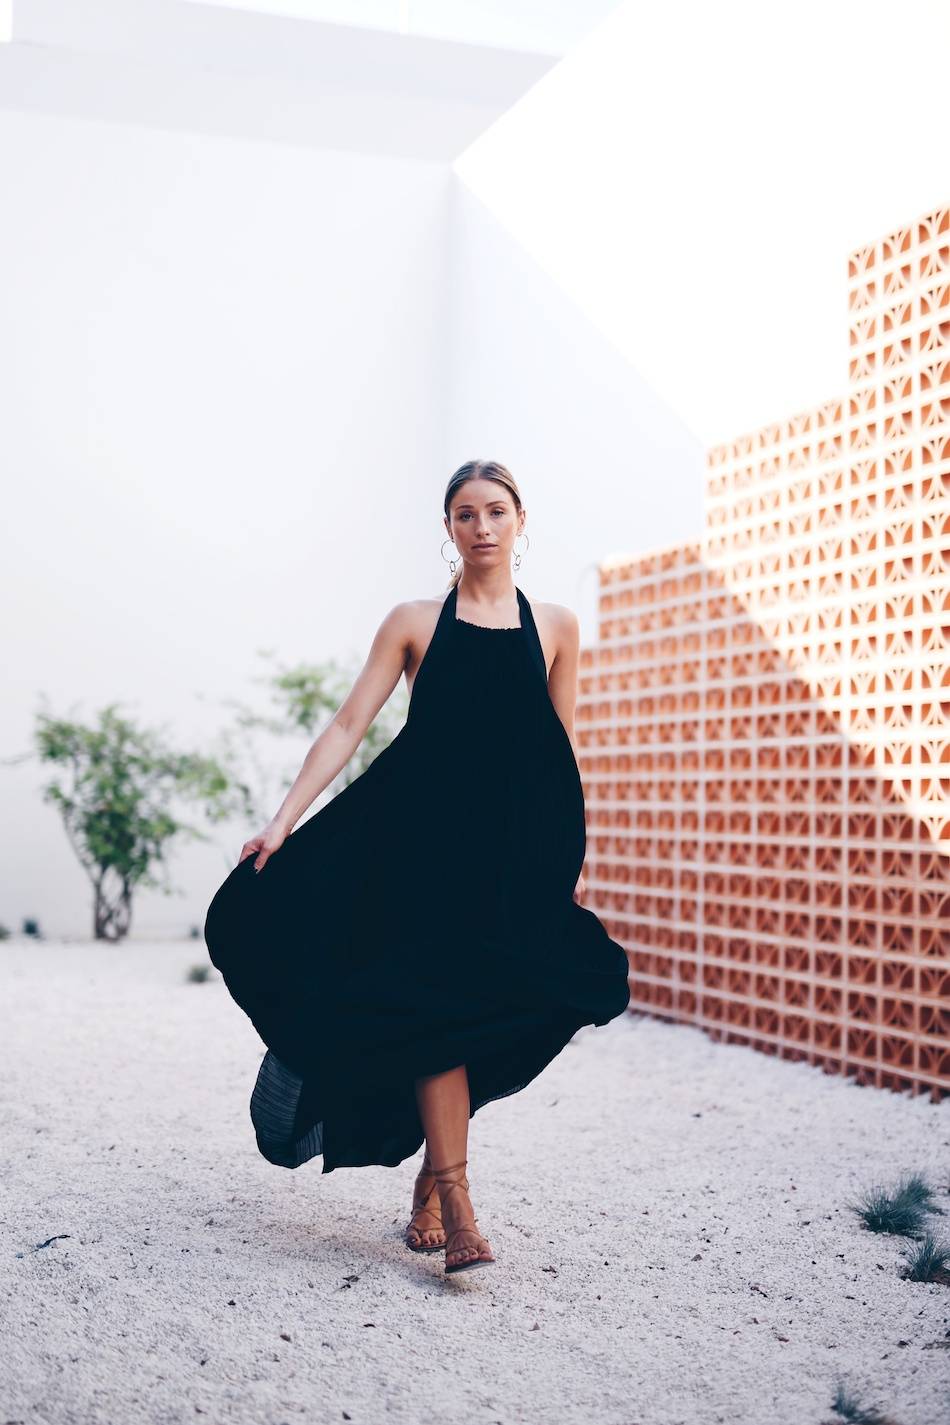 Style and beauty blogger Jill Lansky of The August Diaries on what to wear to dinner on vacation in Aritzia black maxi dress, Madewell leather gladiator sandals and gold statement earrings